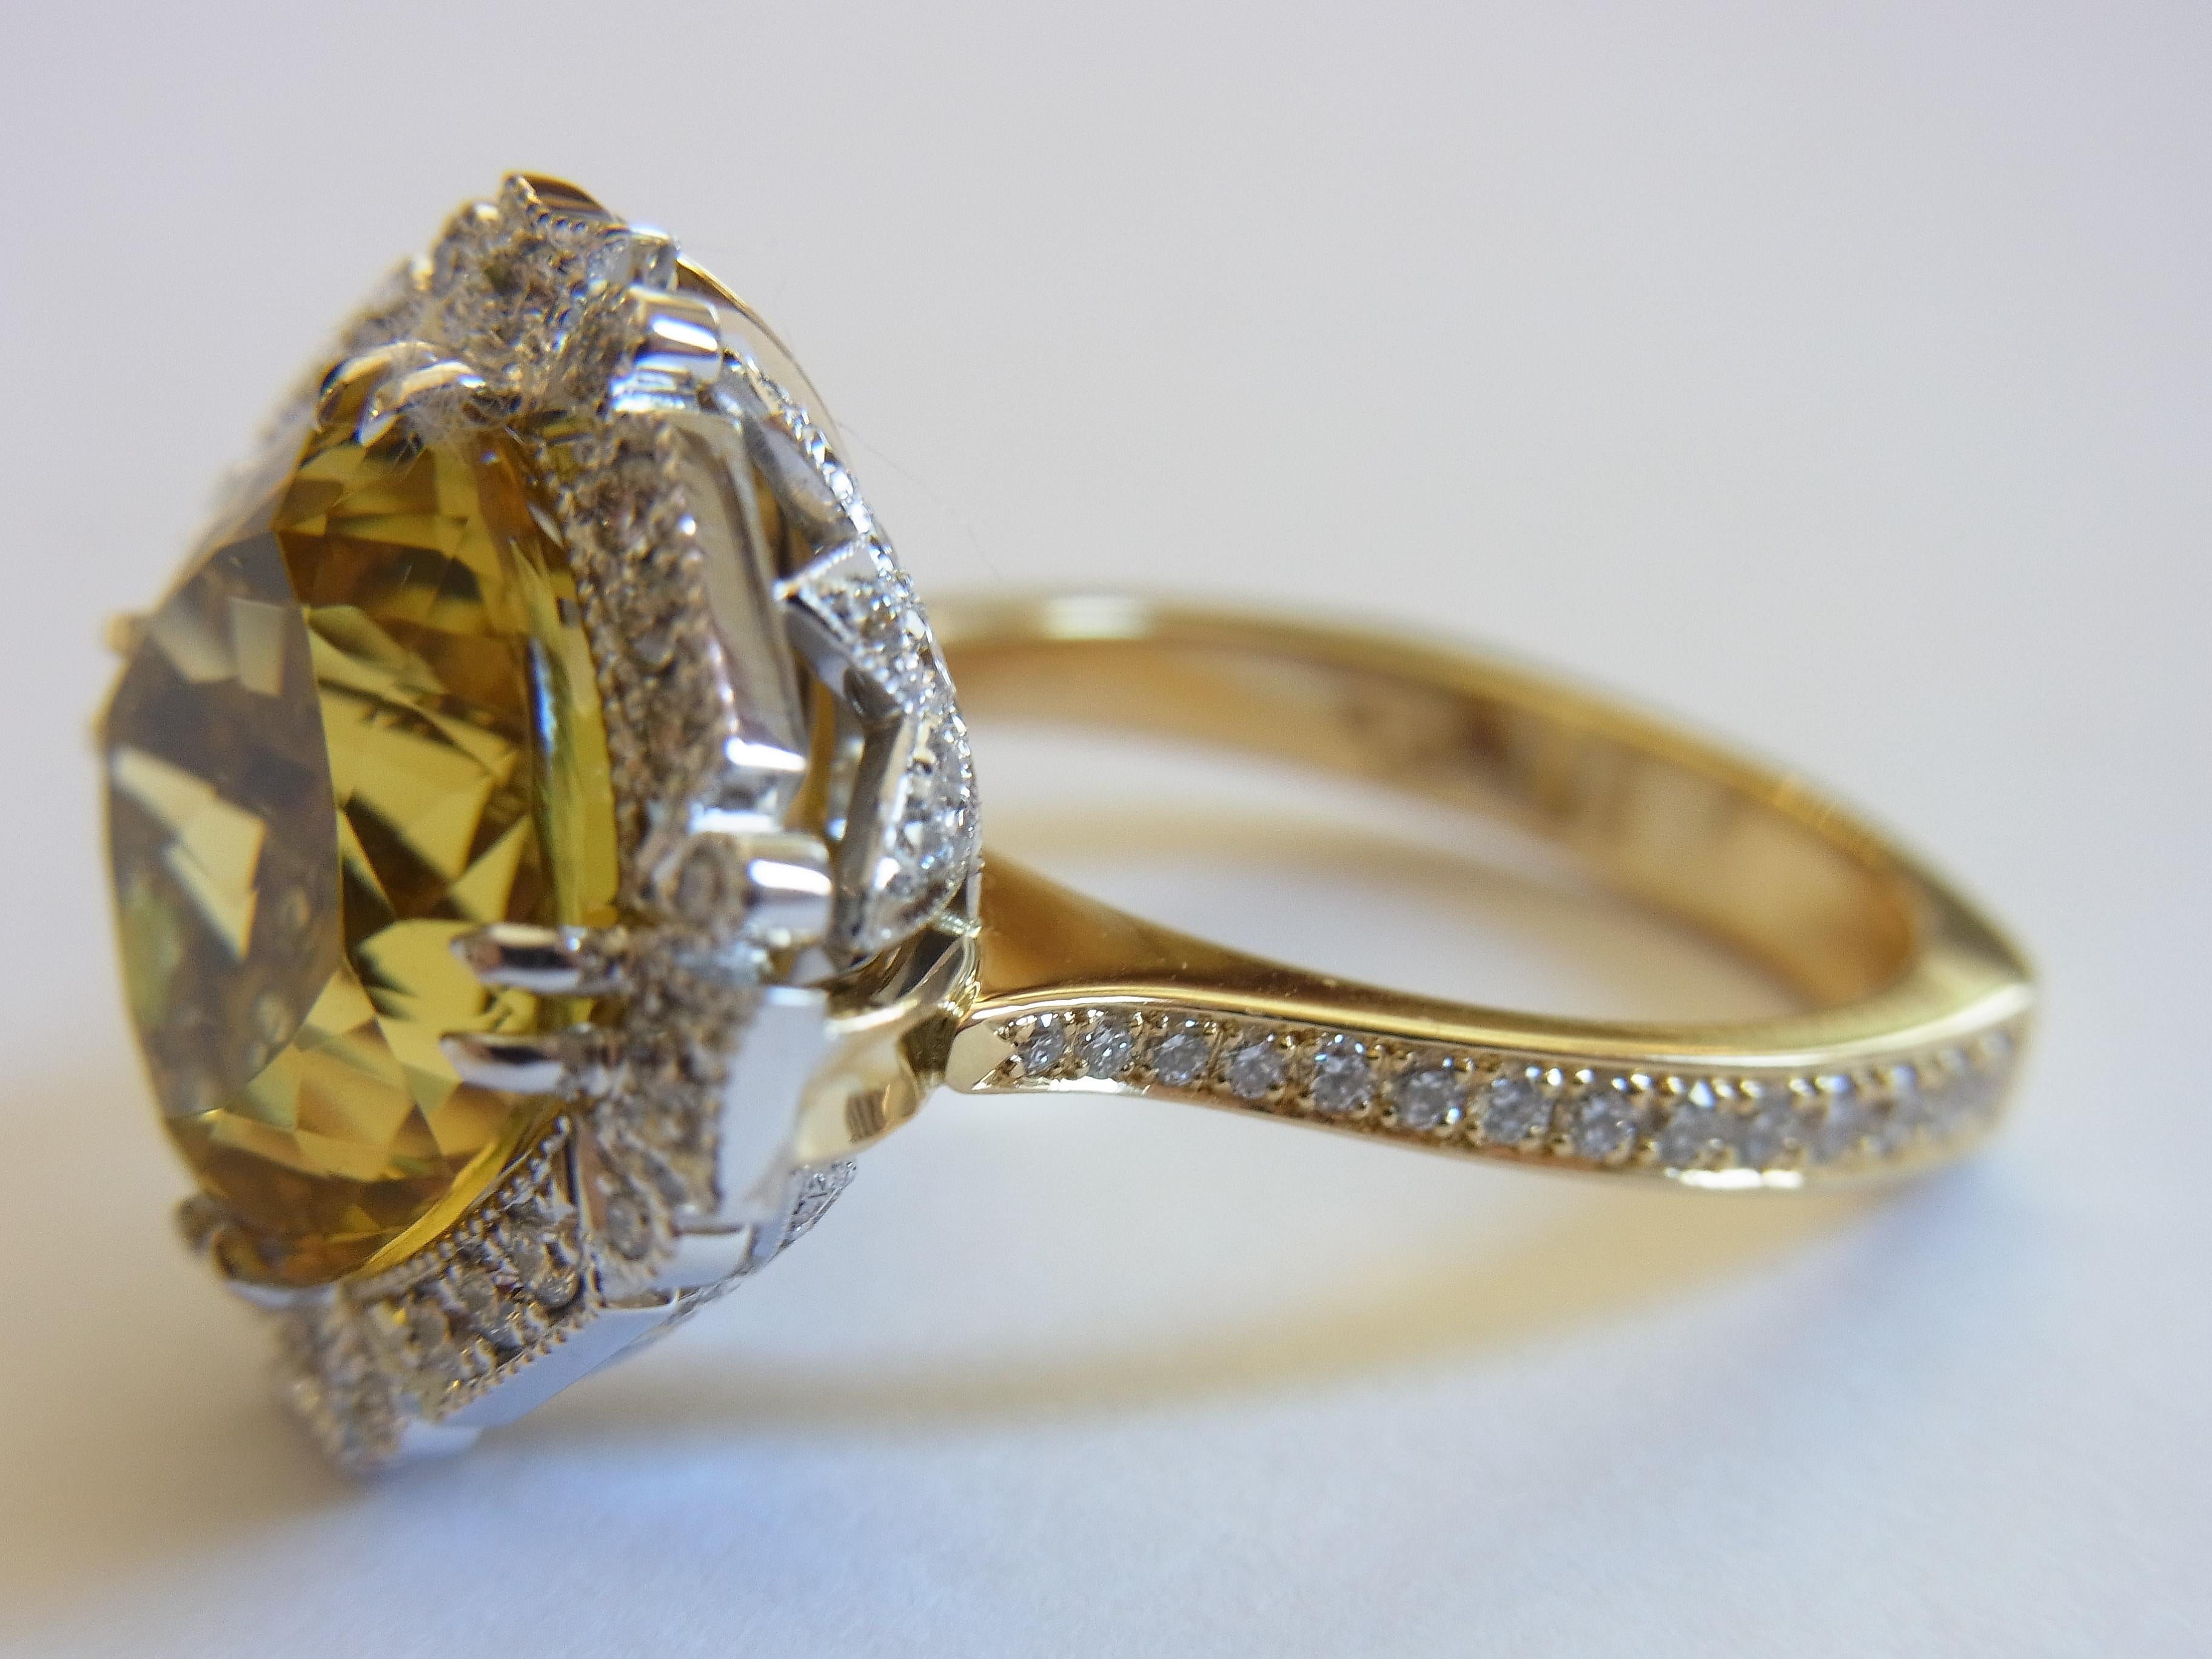 18 carat Golden Beryl and White Diamond Cocktail Engagement Ring

“Lame Collection” natural Golden Beryl and diamond cocktail engagement ring, handcrafted in 18 carat yellow and white gold.
The ring features one 11.5 x 11.5mm premium grade cushion